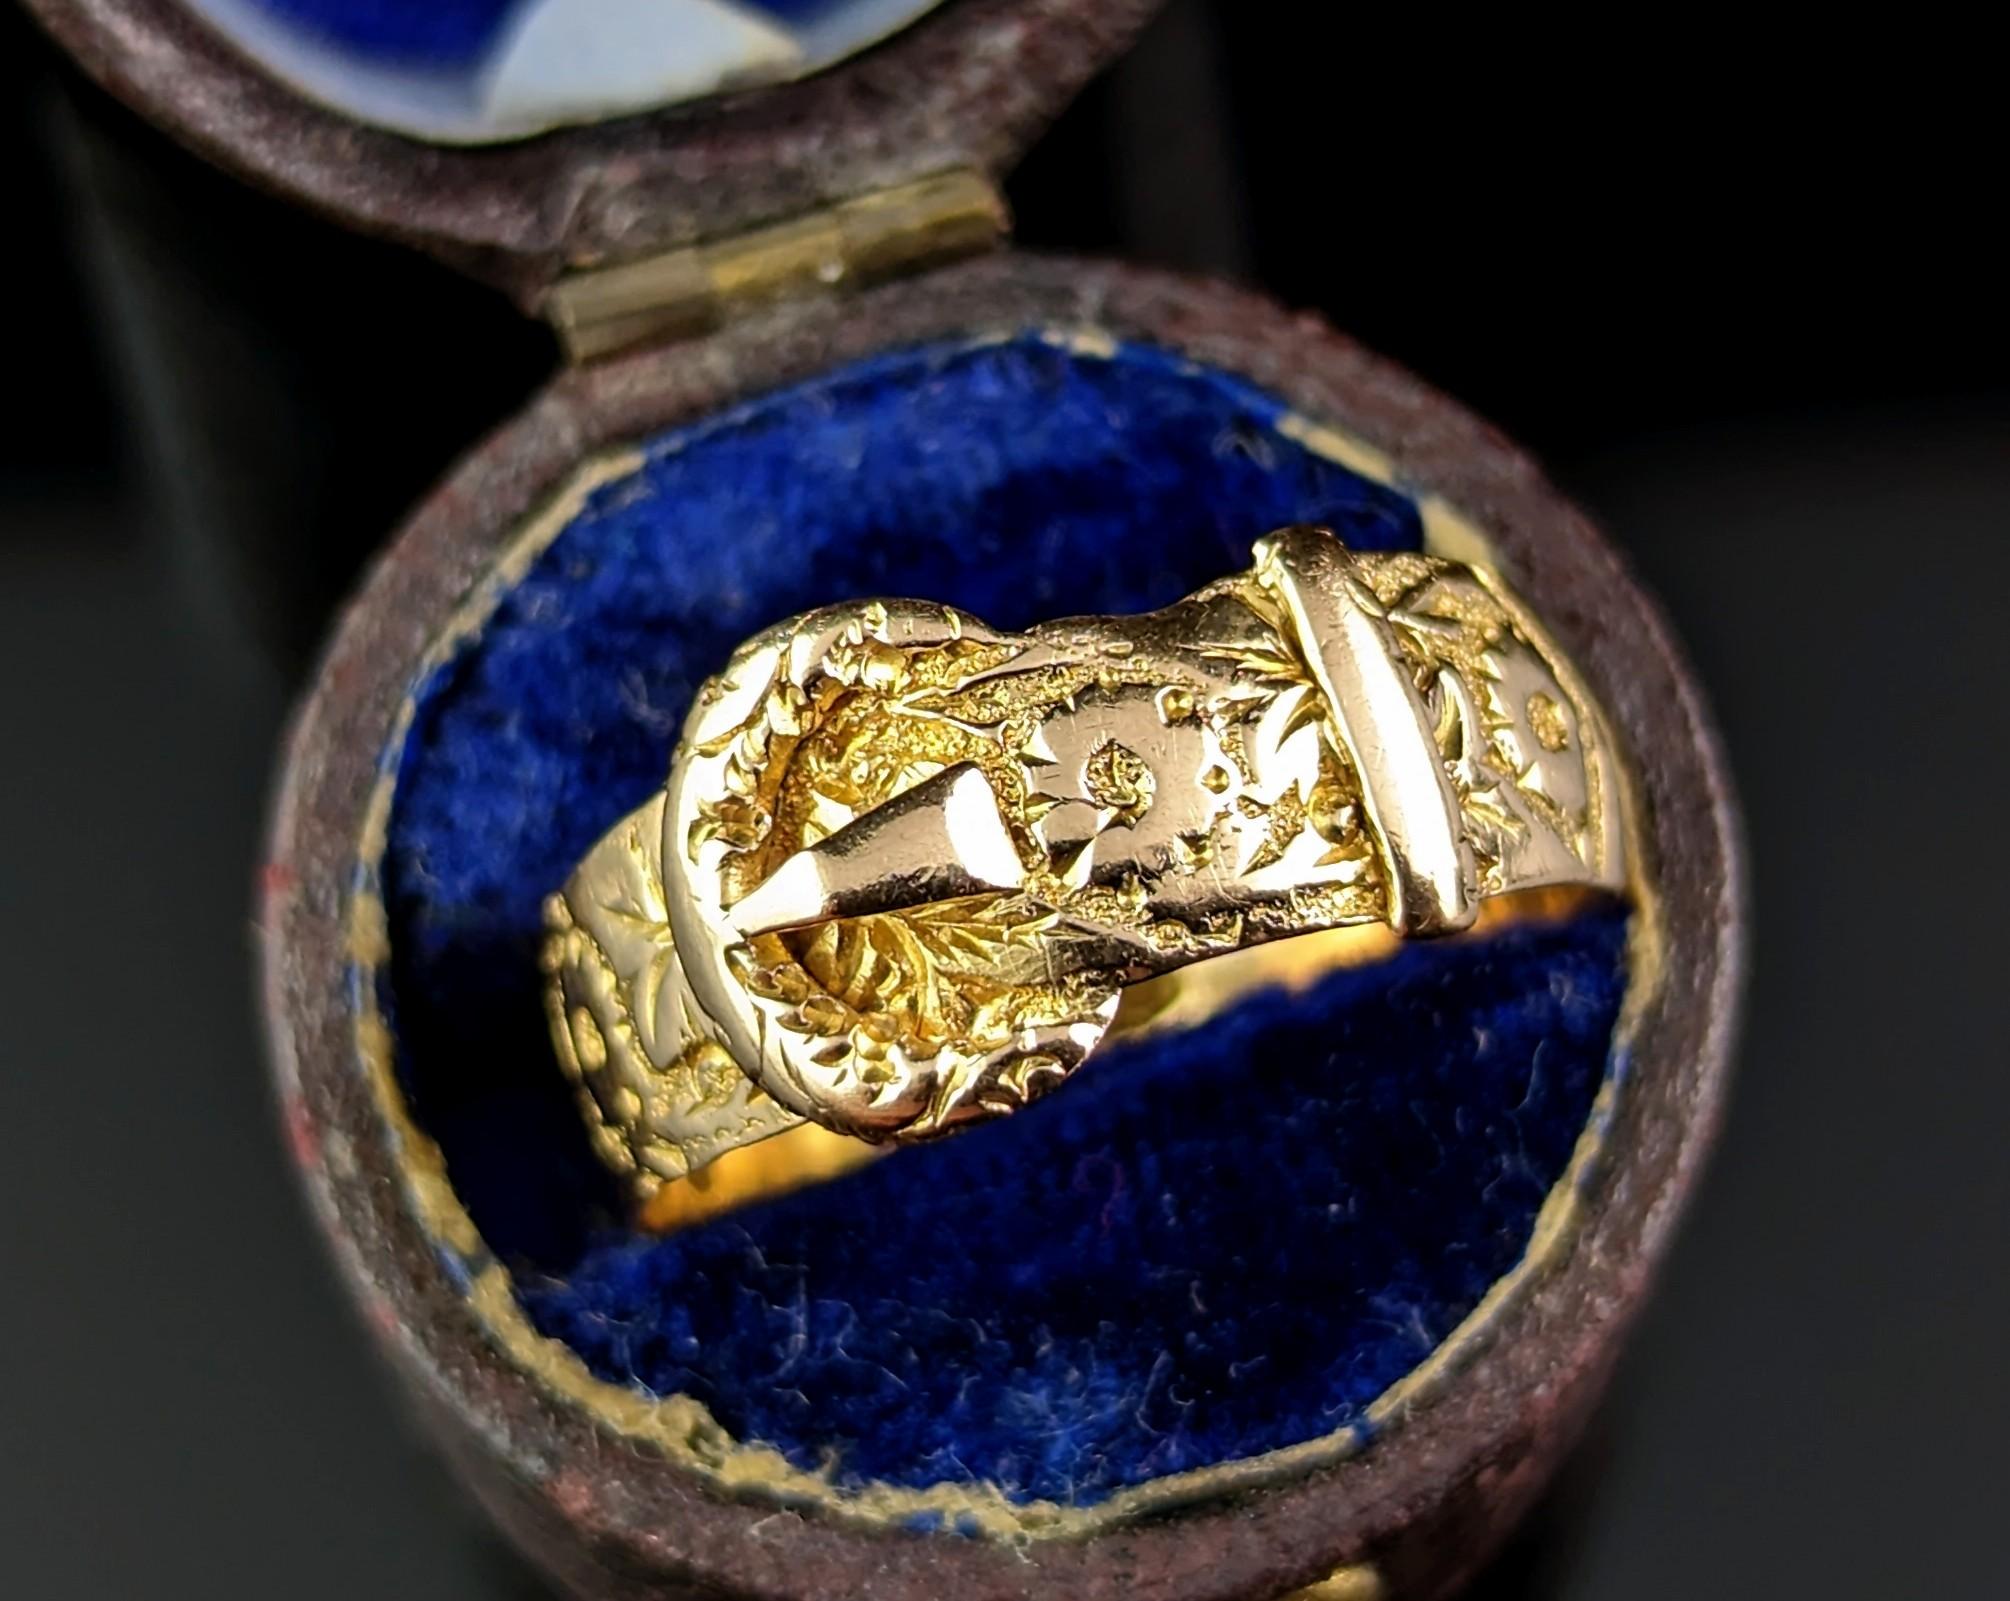 This stunning antique 18kt gold engraved Buckle ring is so rich and enchanting.

The buttery gold band is heavily chased and engraved with an orange blossom design and it has a buckle front design, the buckle traditionally symbolises holding someone